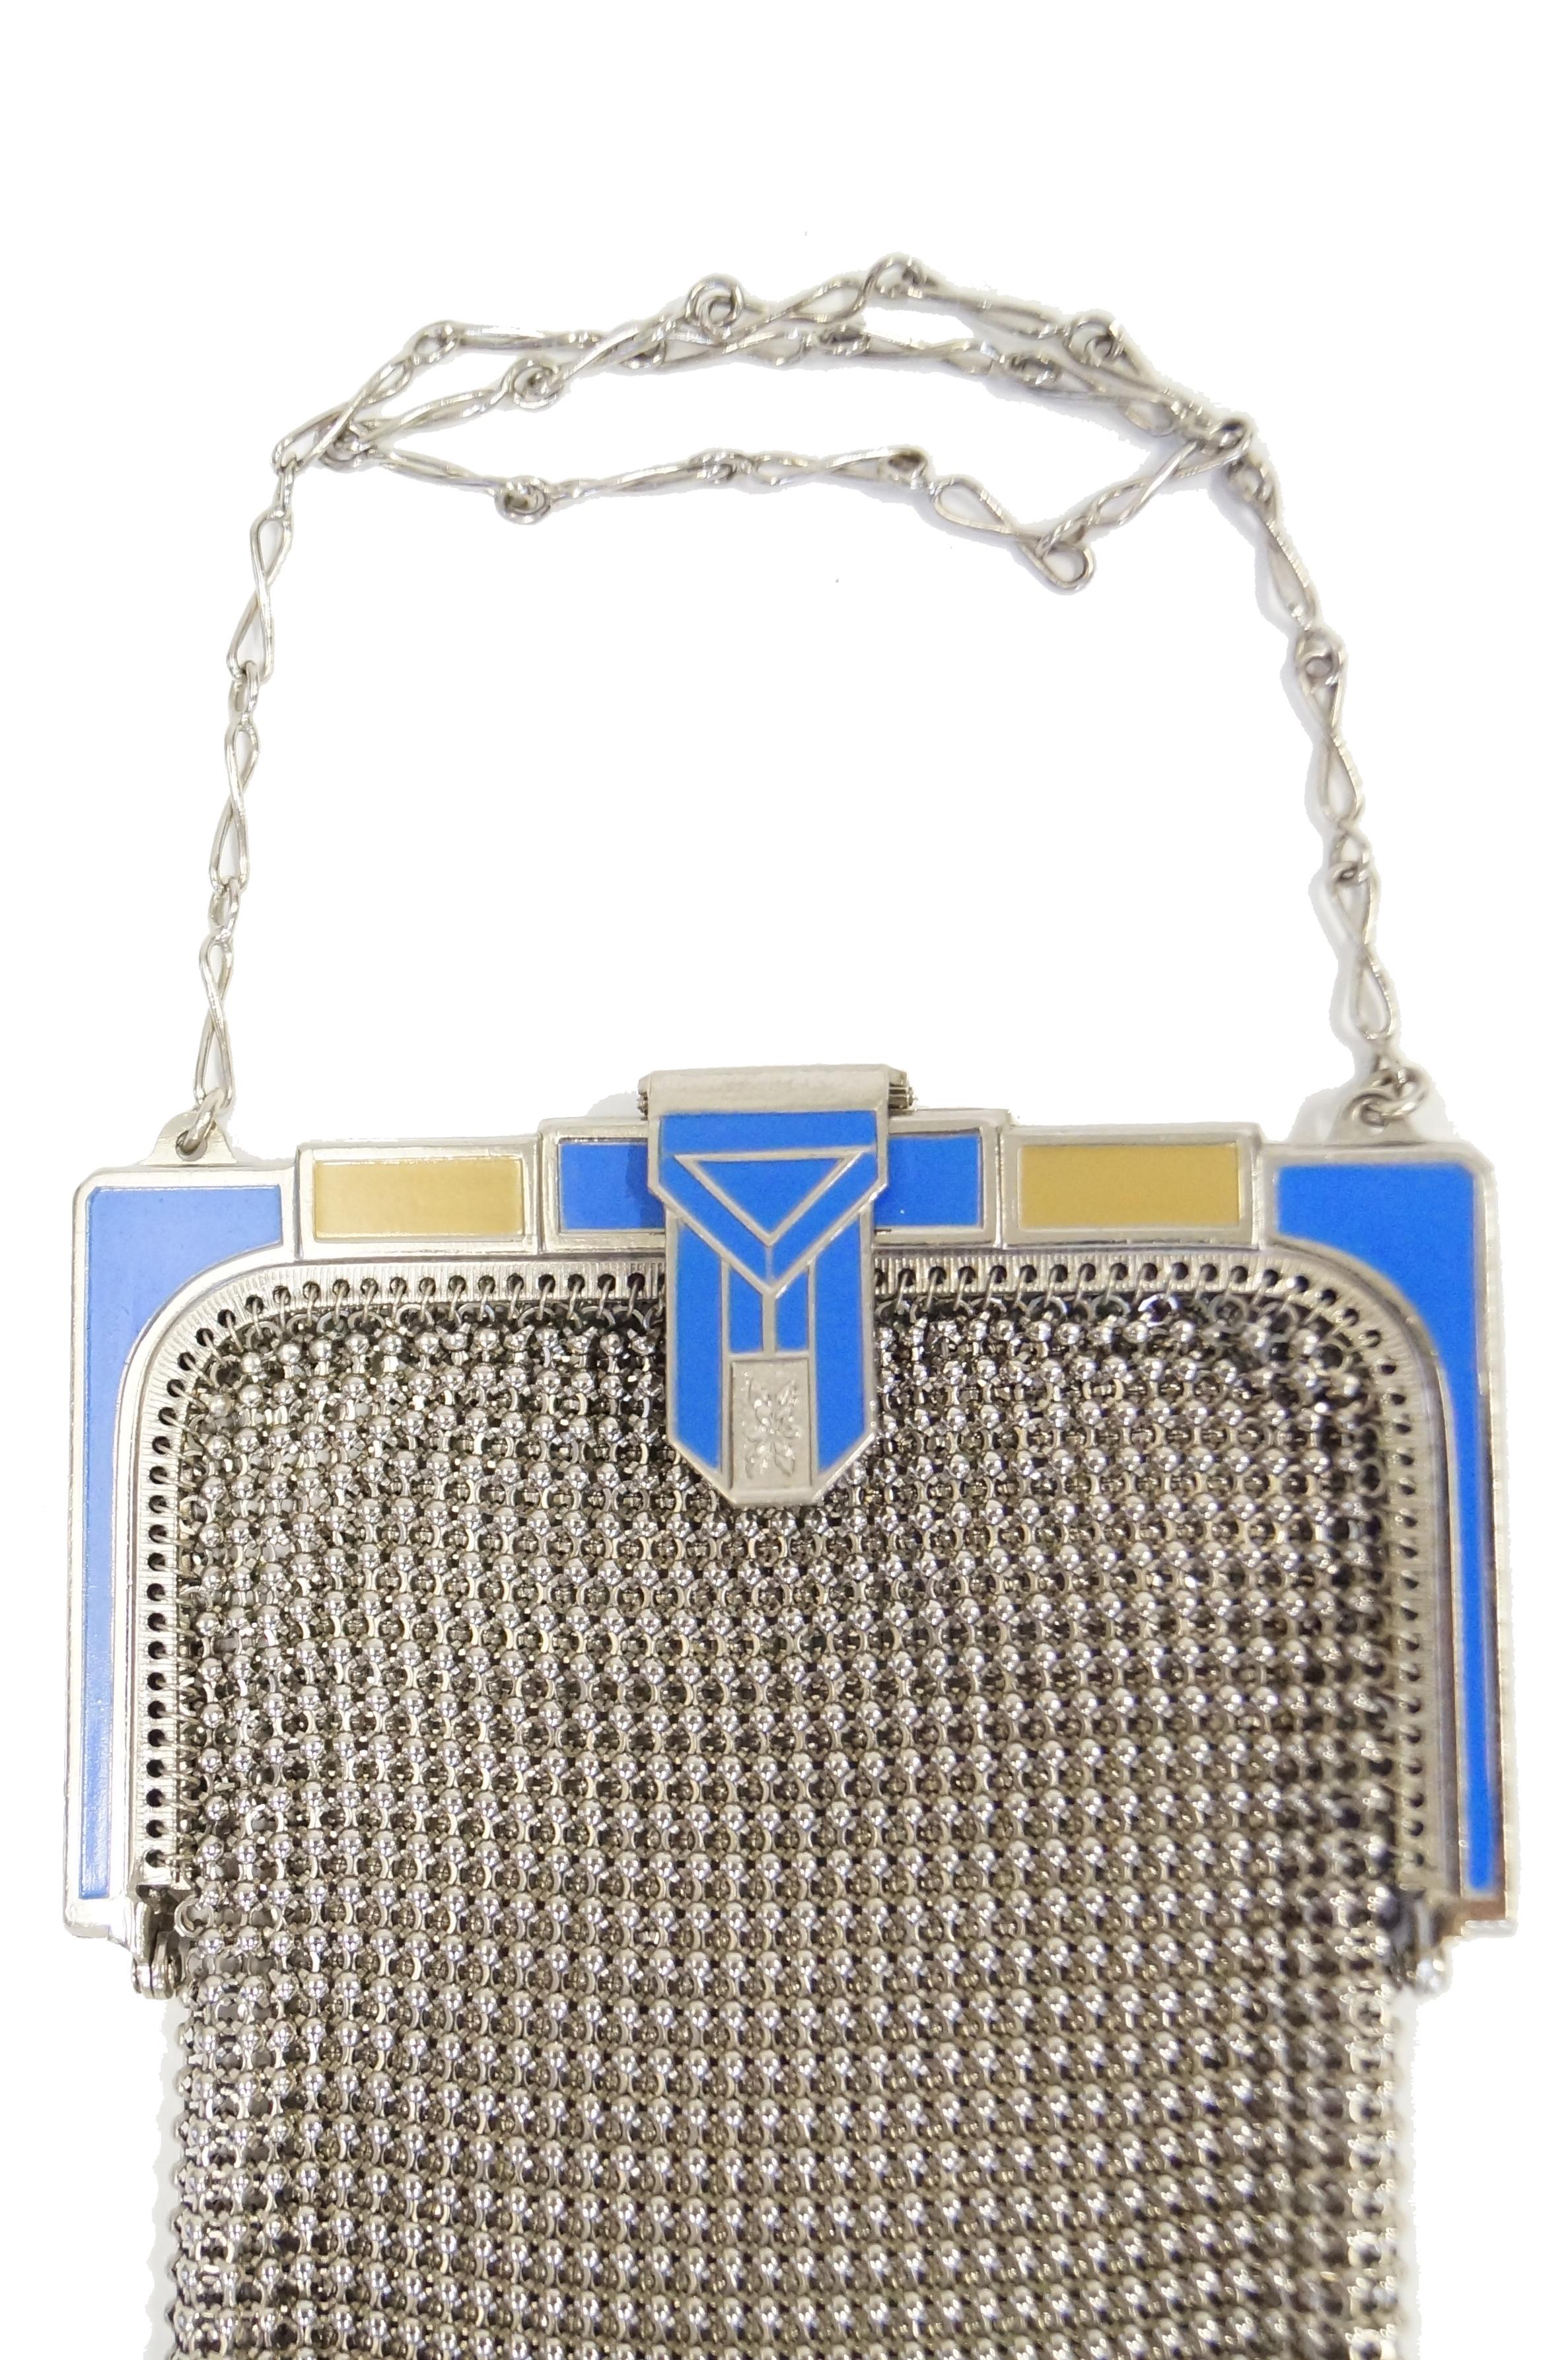 Elegant 1920s Whiting and Davis evening purse! This gorgeous mesh purse features a pressed art deco geometric triangular clasp featuring accents of bright blue enamel. The mesh body of the purse is unpainted, allowing one to admire the intricacies